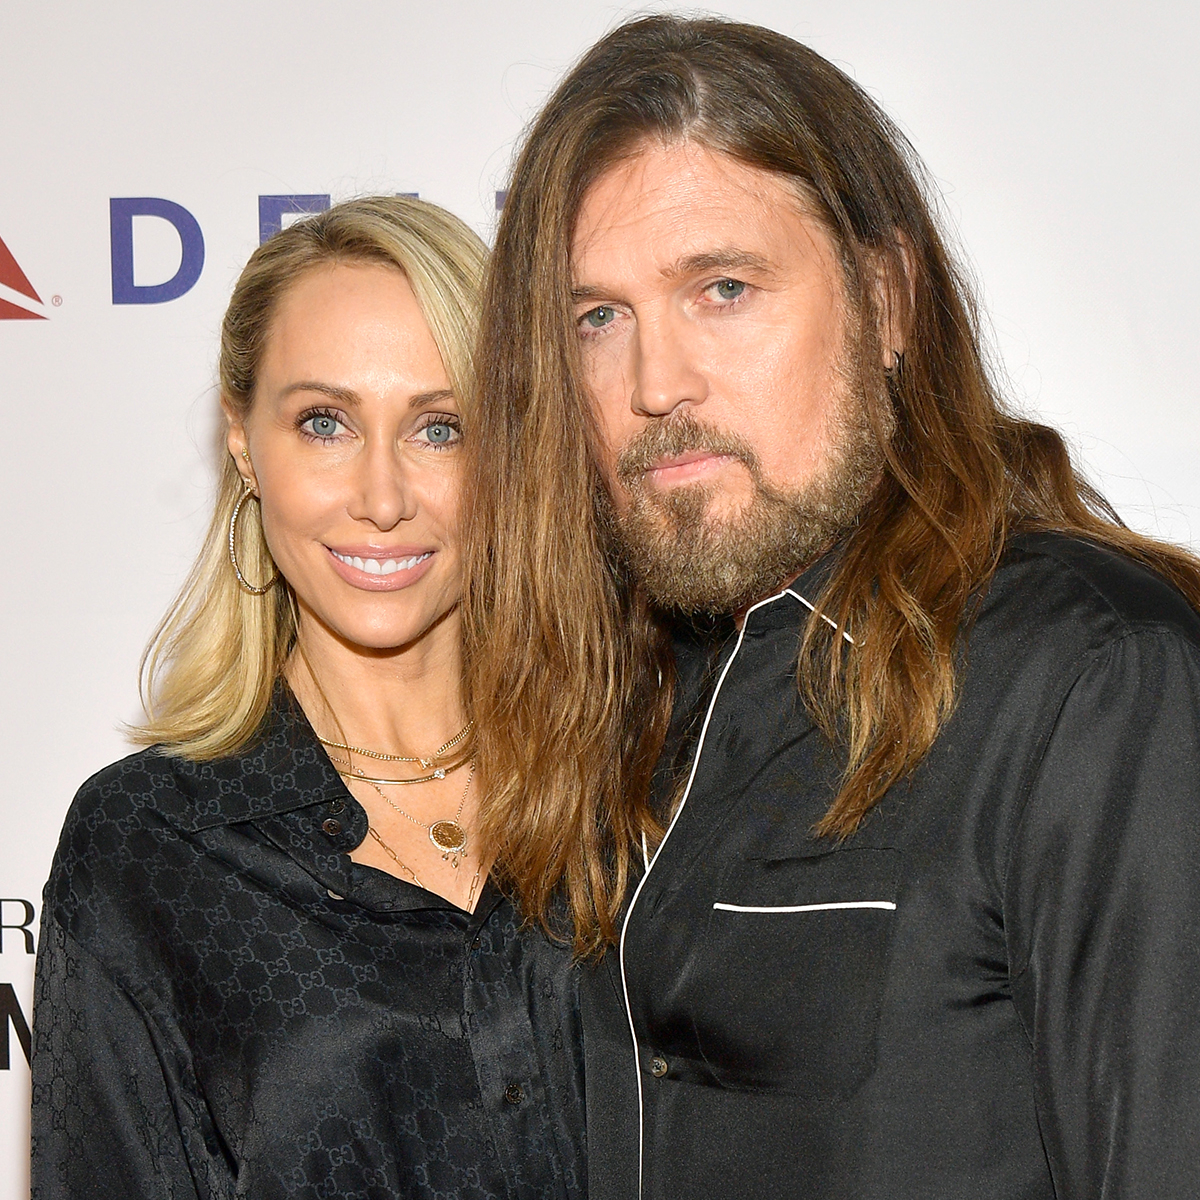 How Miley Cyrus Feels Amid Dad Billy Ray Cyrus' Romance With Firerose